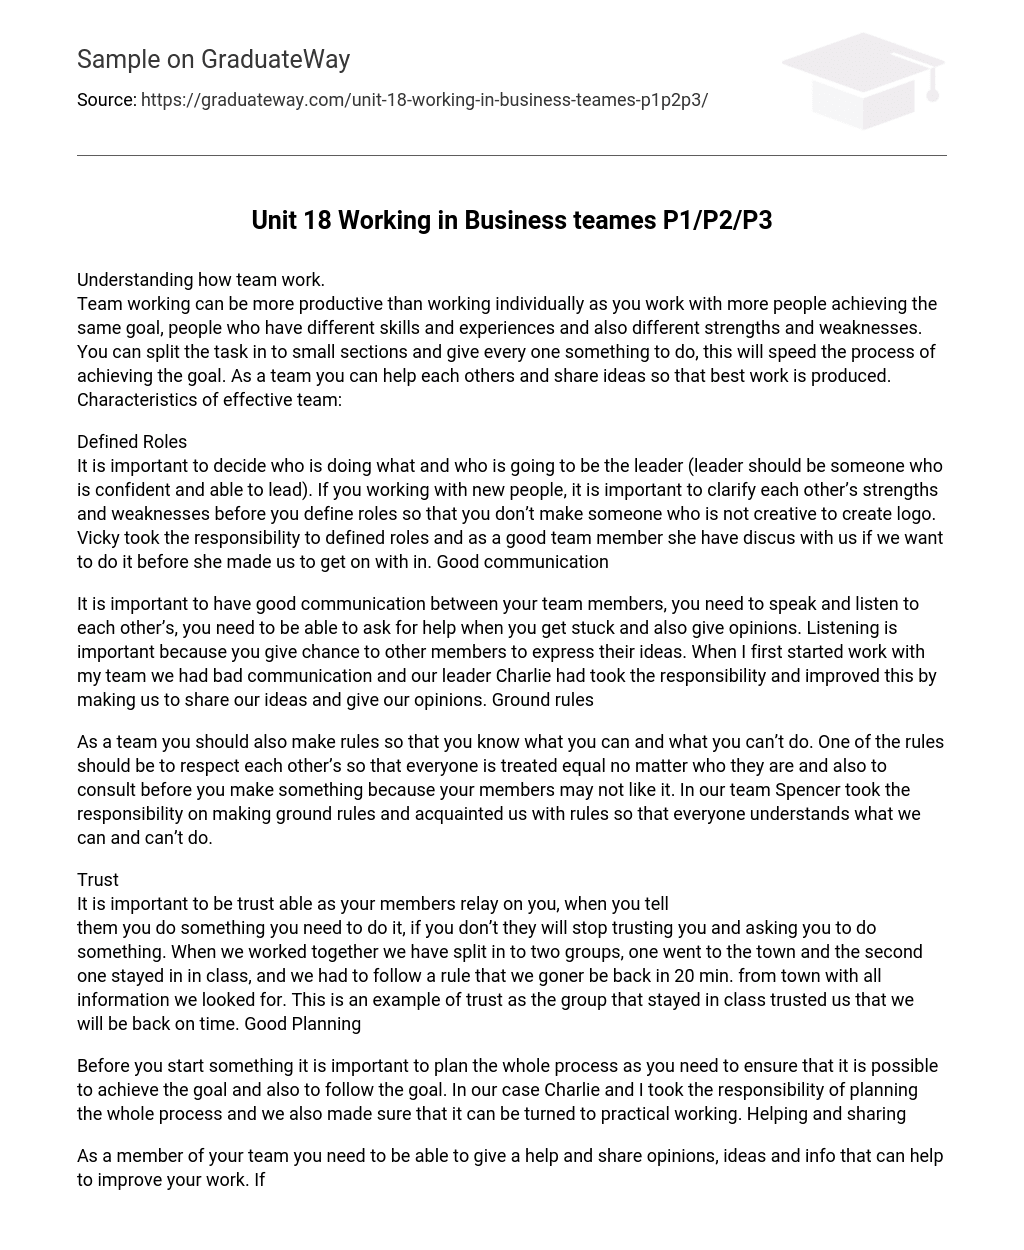 Unit 18 Working in Business teames P1/P2/P3